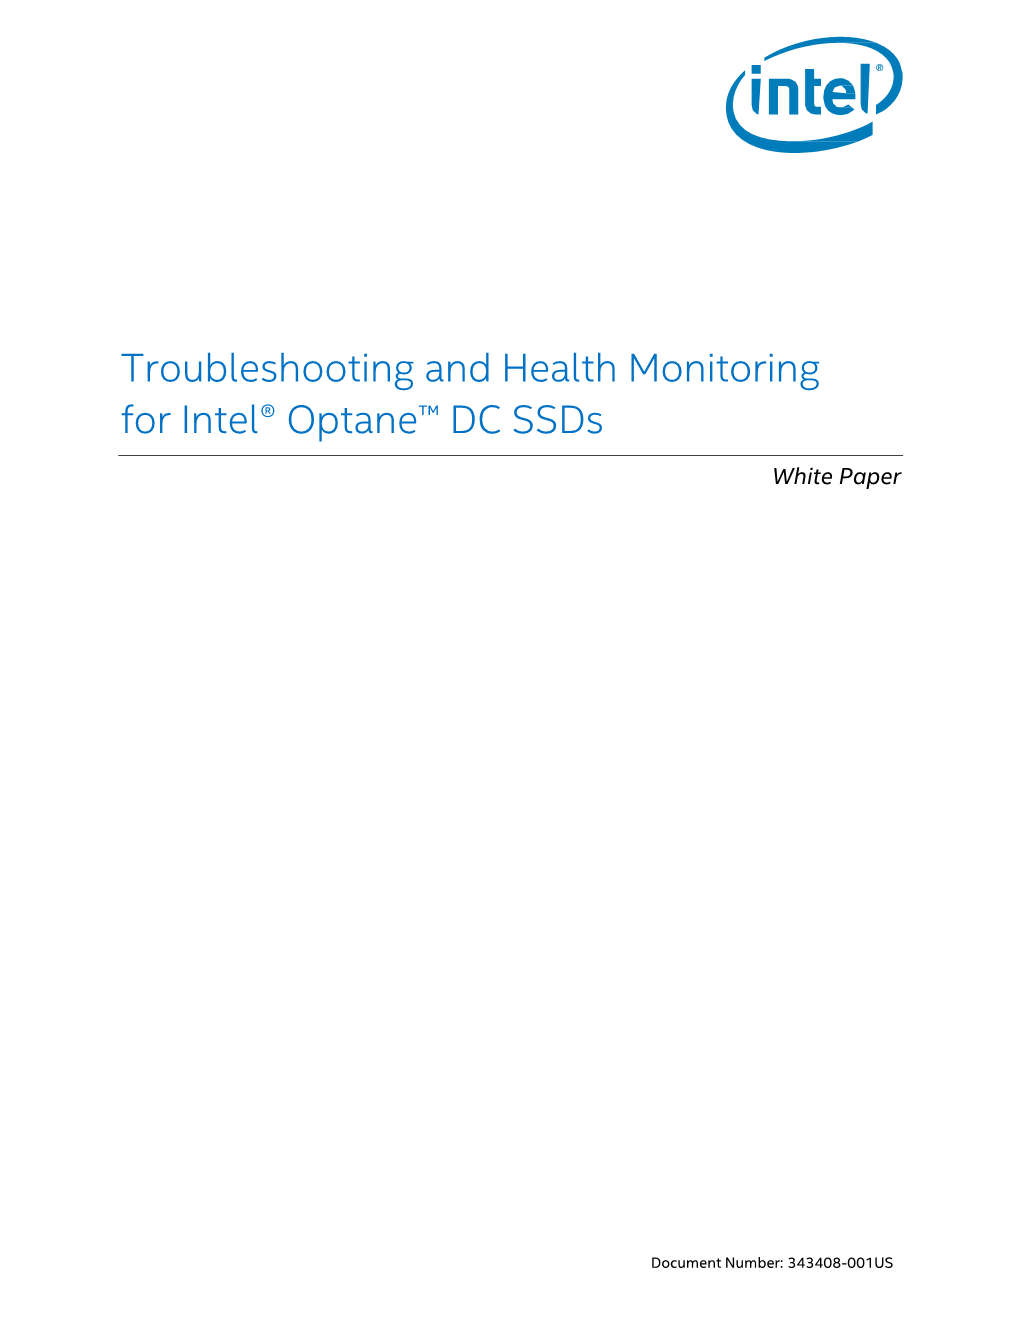 Intel Optane DC SSD Troubleshooting & Health Monitoring White Paper